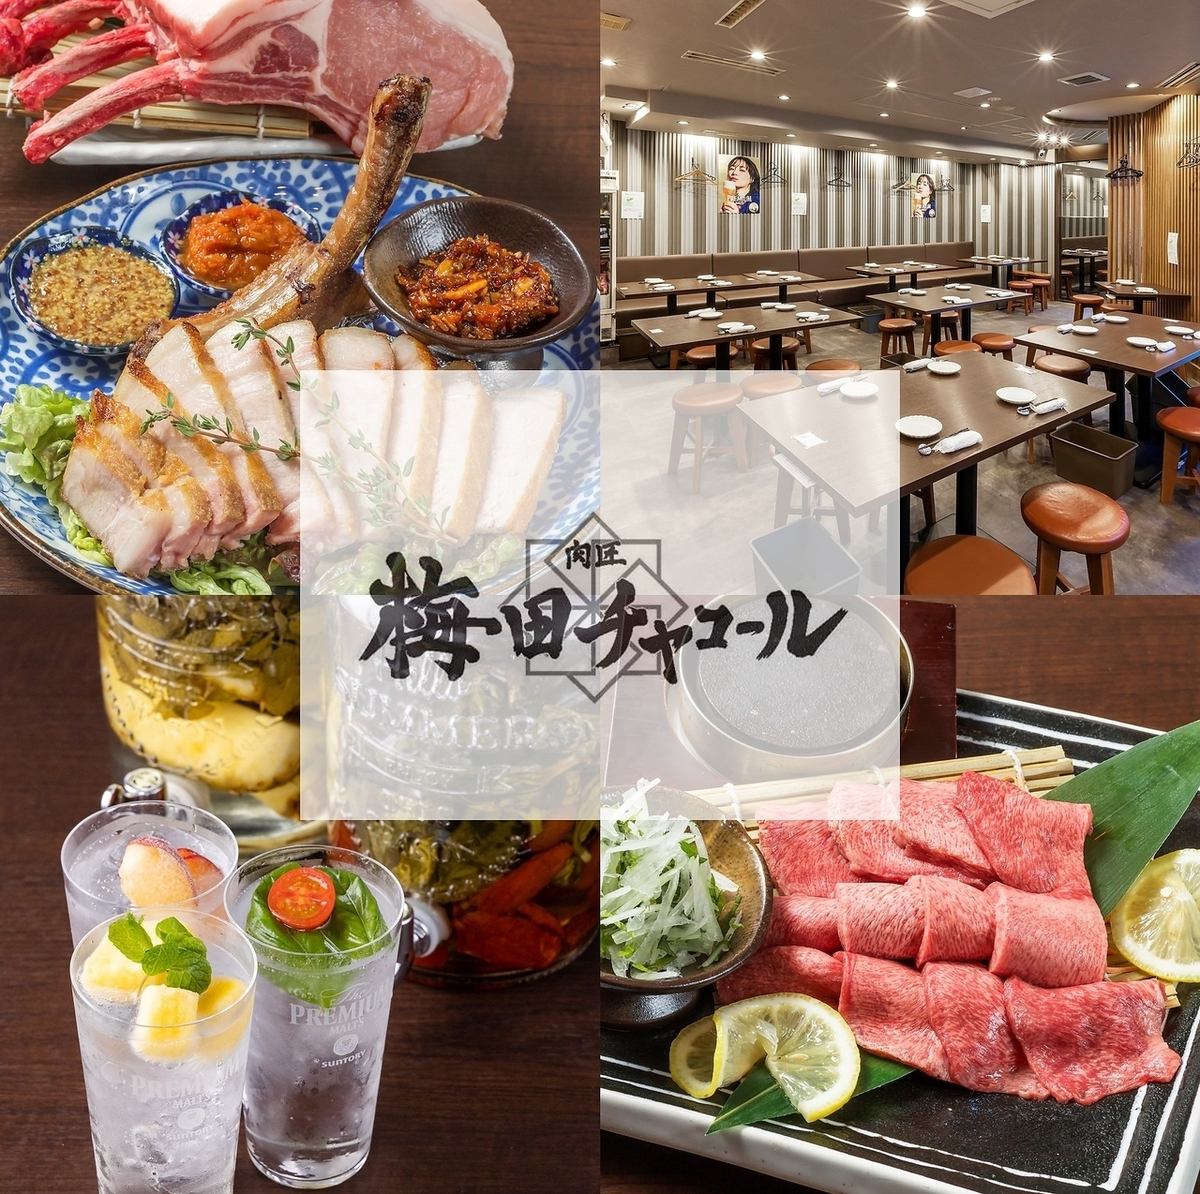 Please enjoy the meat dishes made with carefully selected ingredients at the sister restaurant of "Oni ni Kanabō"!